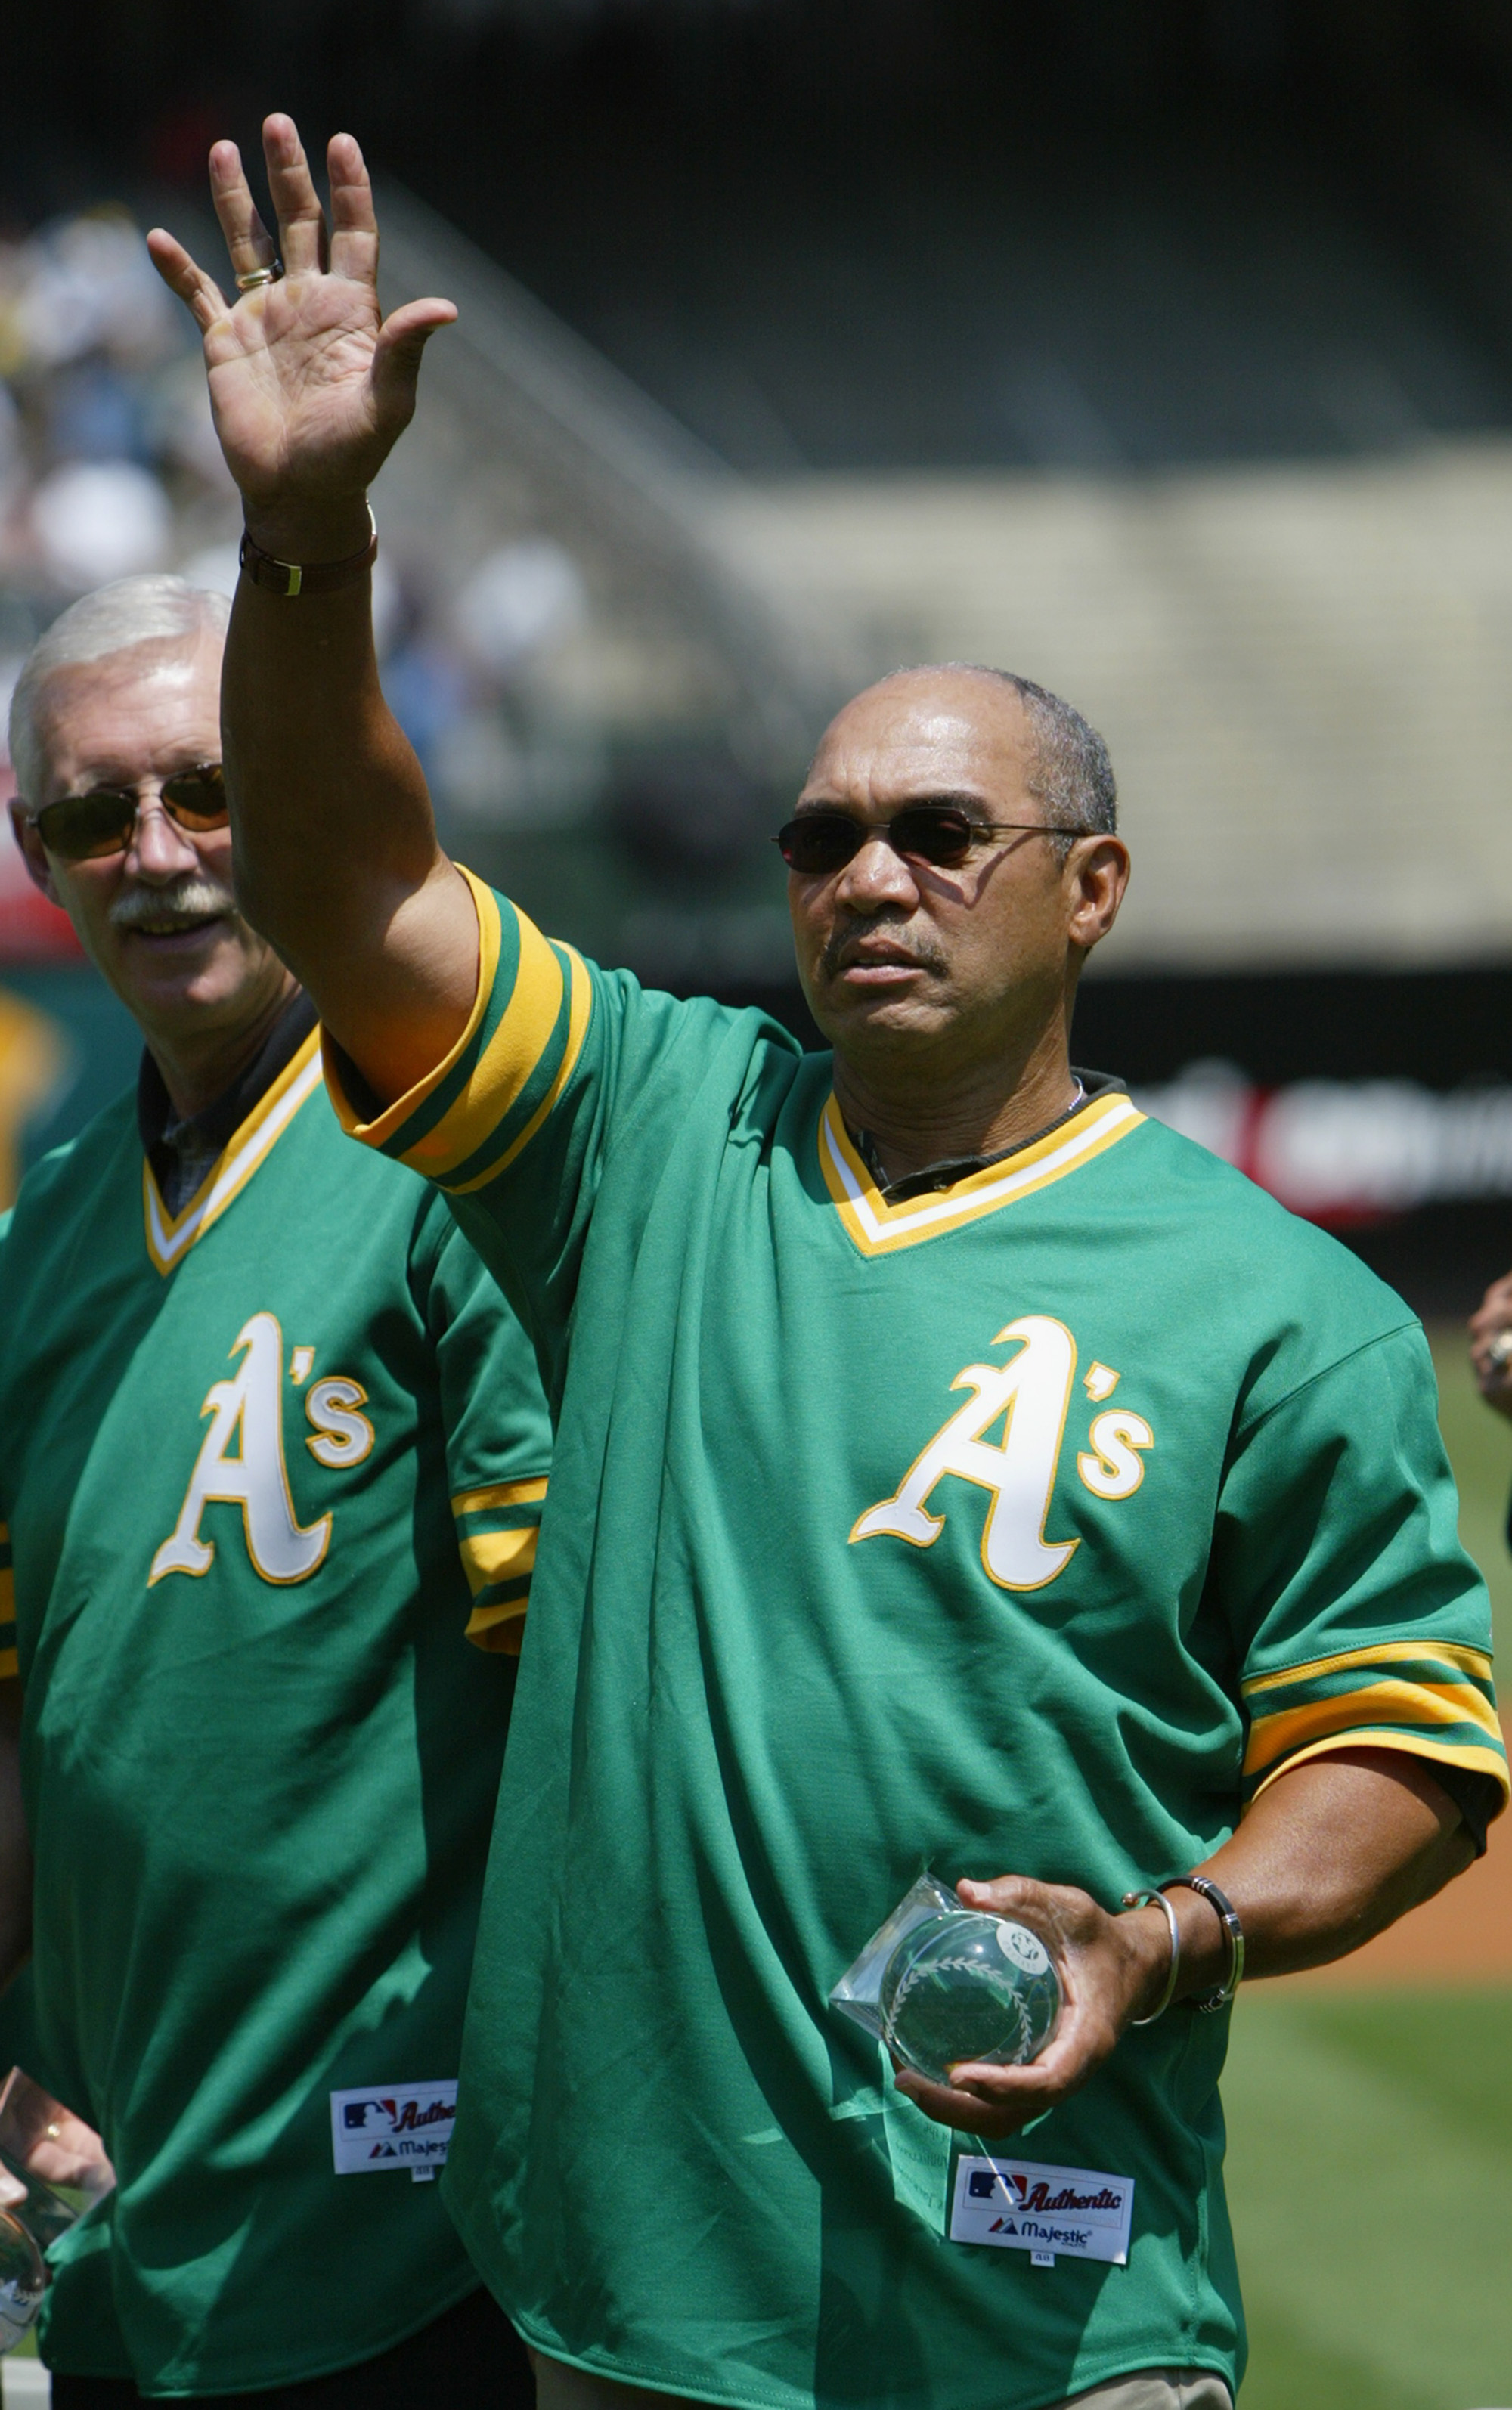 An Oakland A's encore for Rickey? MLB's seen crazier stunts